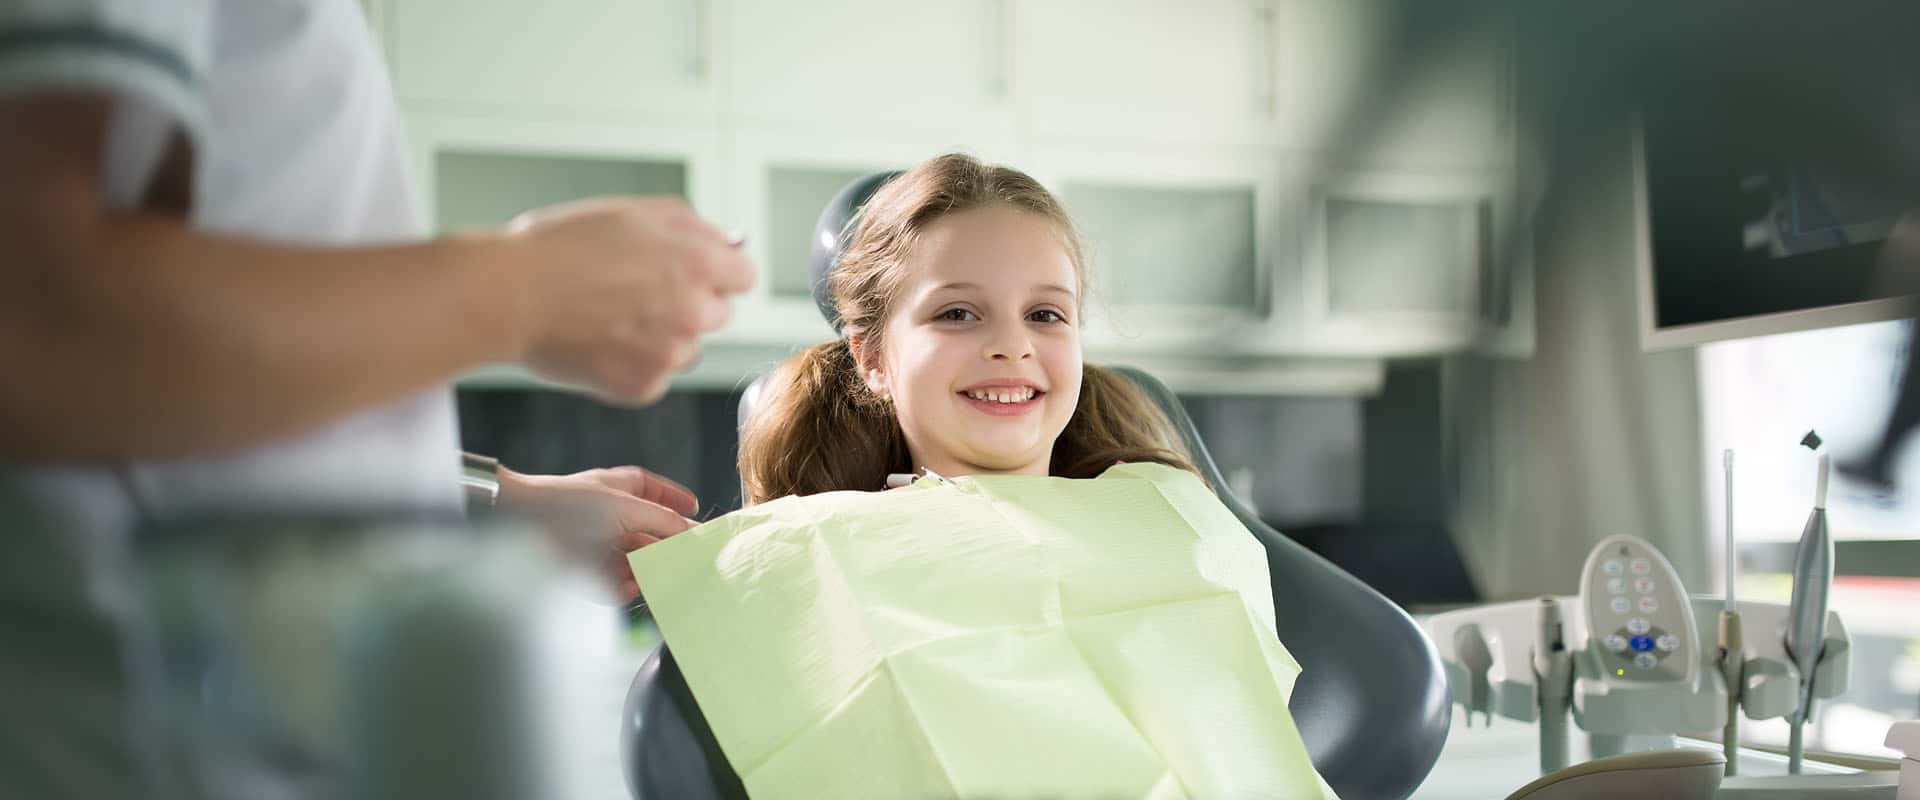 4 Ways to Ease Your Child's Anxiety About A Trip To the Dentist